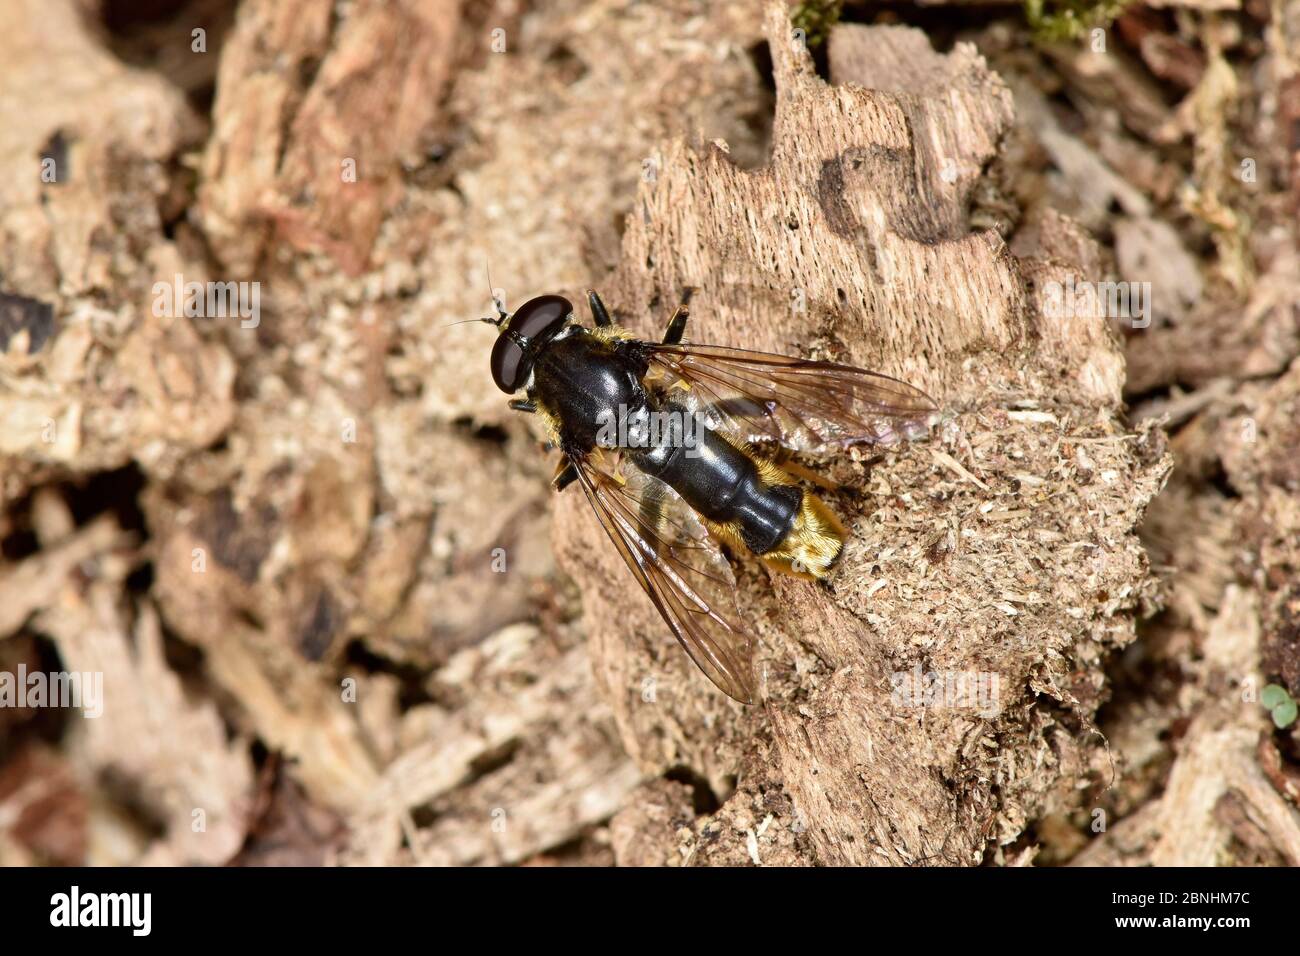 Hoverfly (Xylota sylvarum) on rotten tree stump where eggs are typically laid and larvae develop, Berkshire, England, UK, July Stock Photo